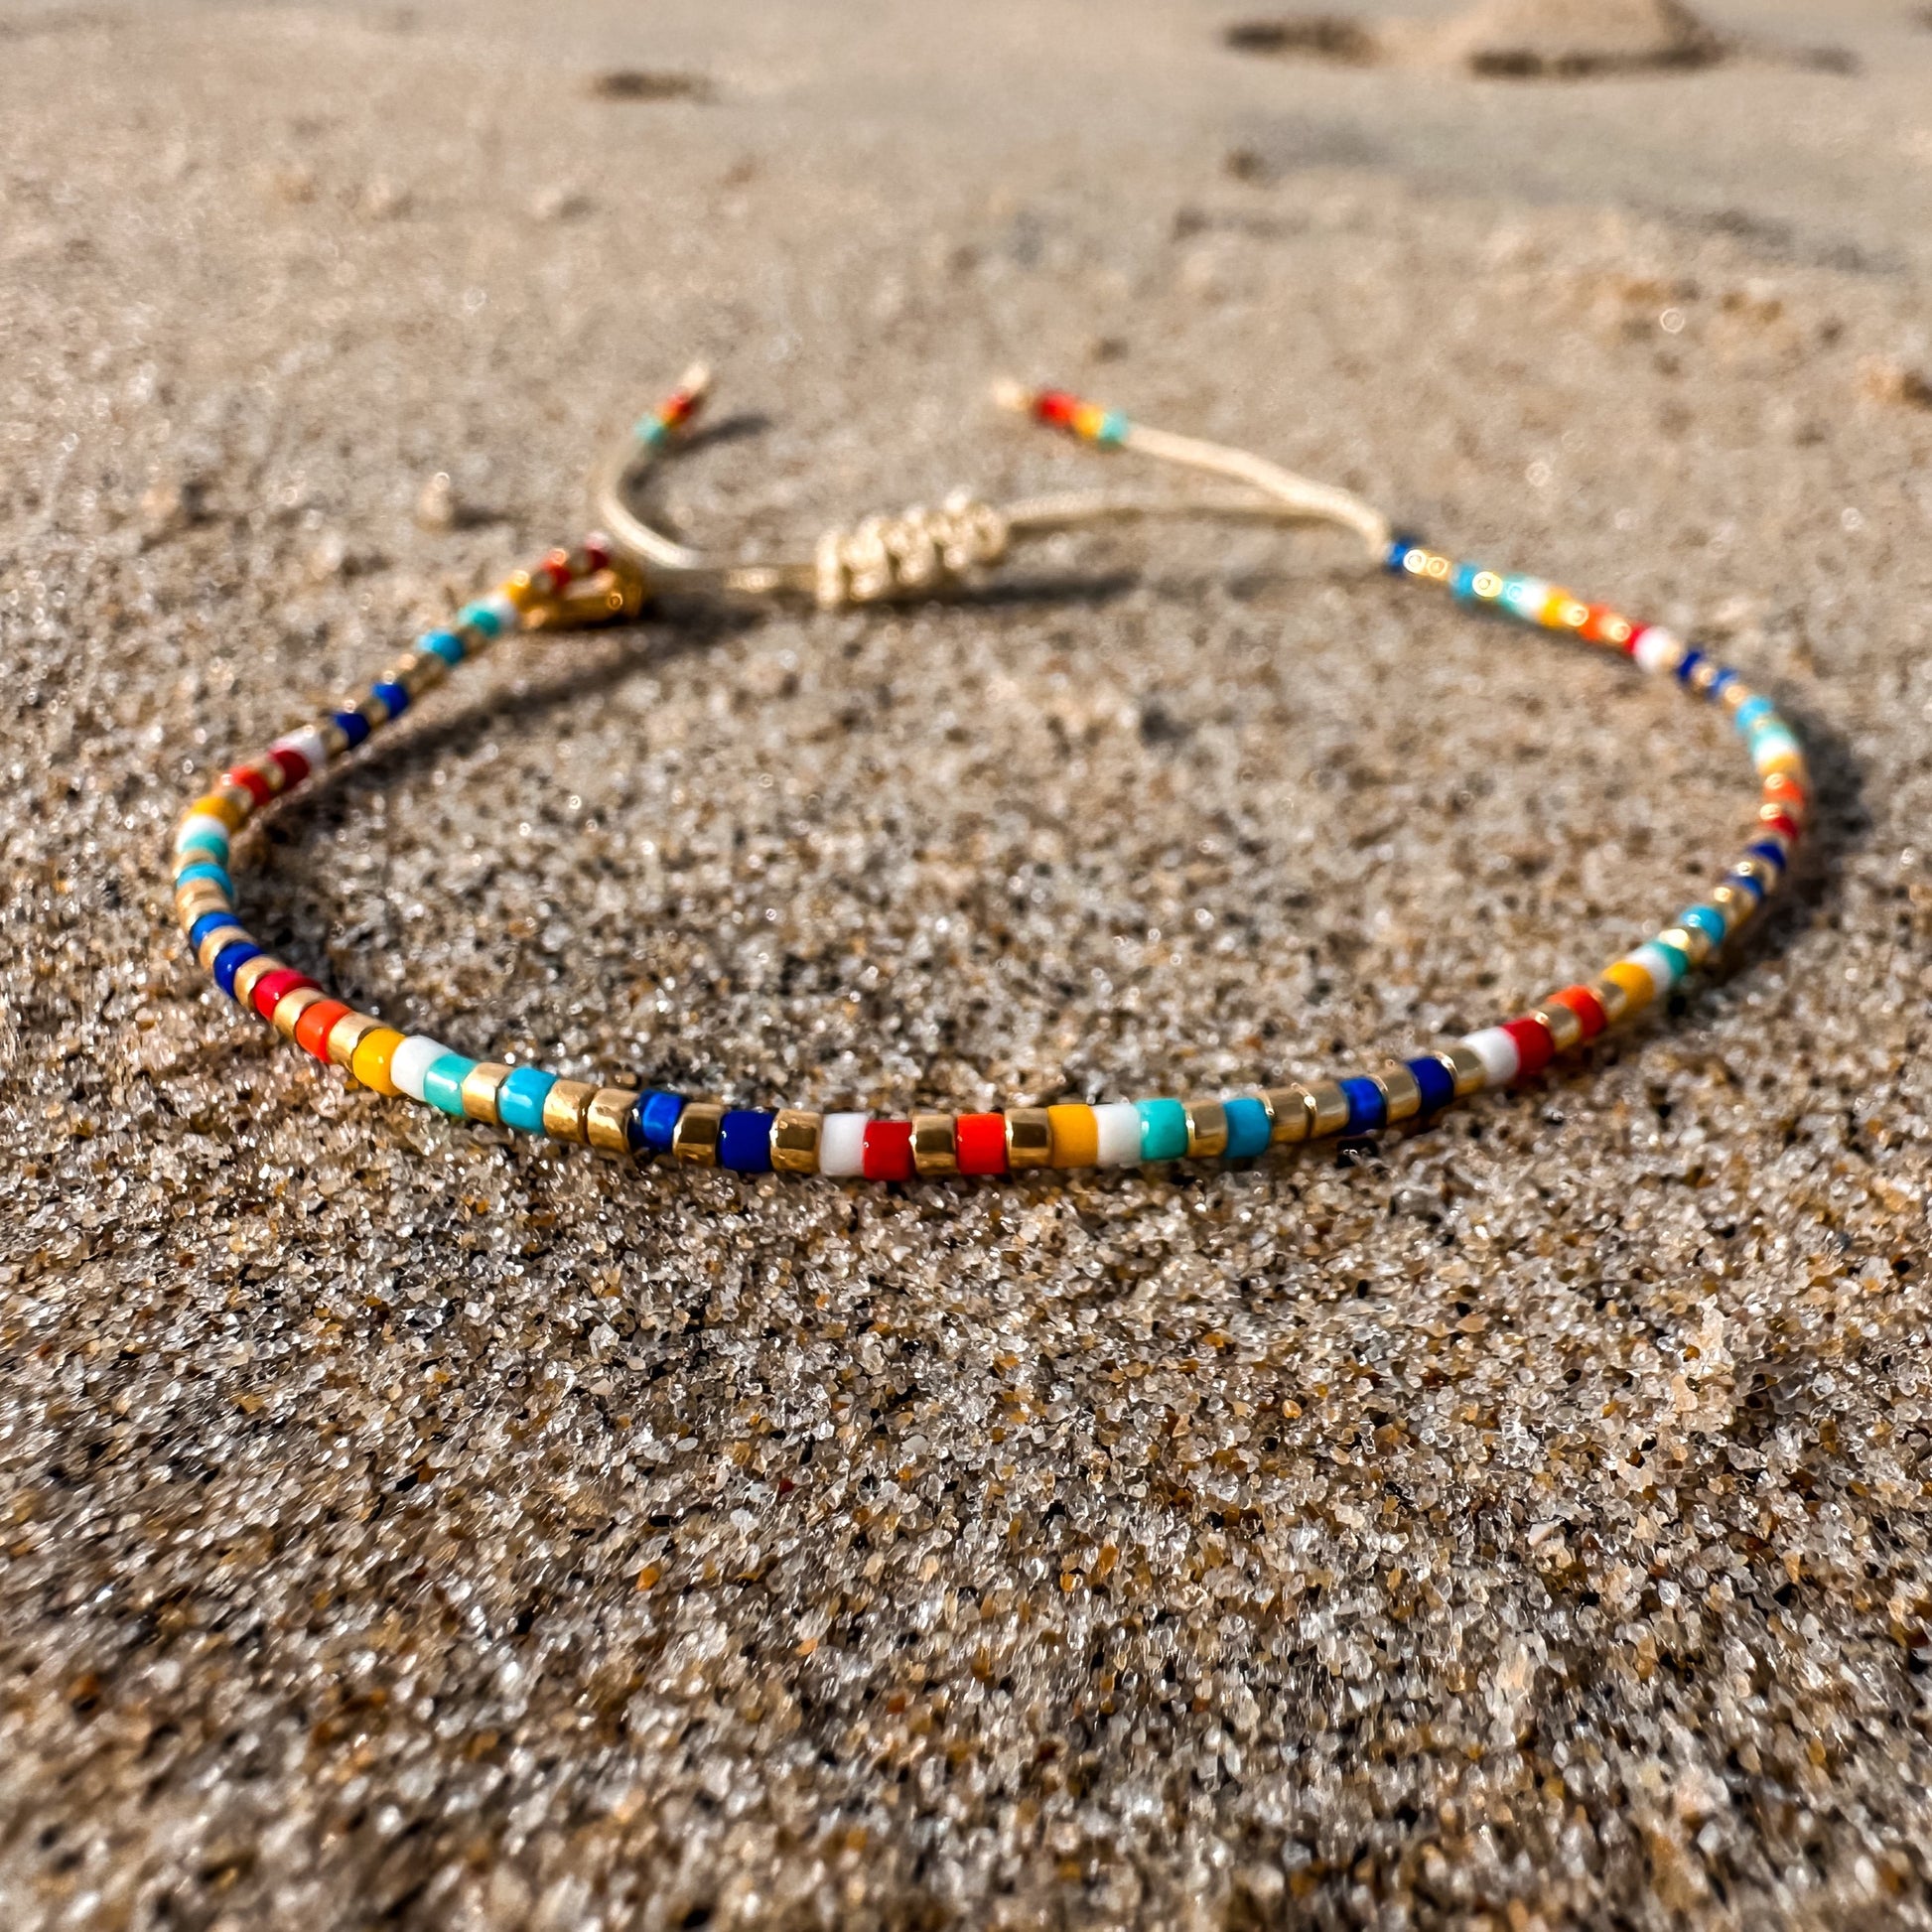 Beaded bracelet, adjustable bracelet made with colored beads, friendship bracelet, Surf Jewelry made by Born to Rock Jewelry, Family owned sports inspired and lifestyle jewelry brand based in San Diego, California